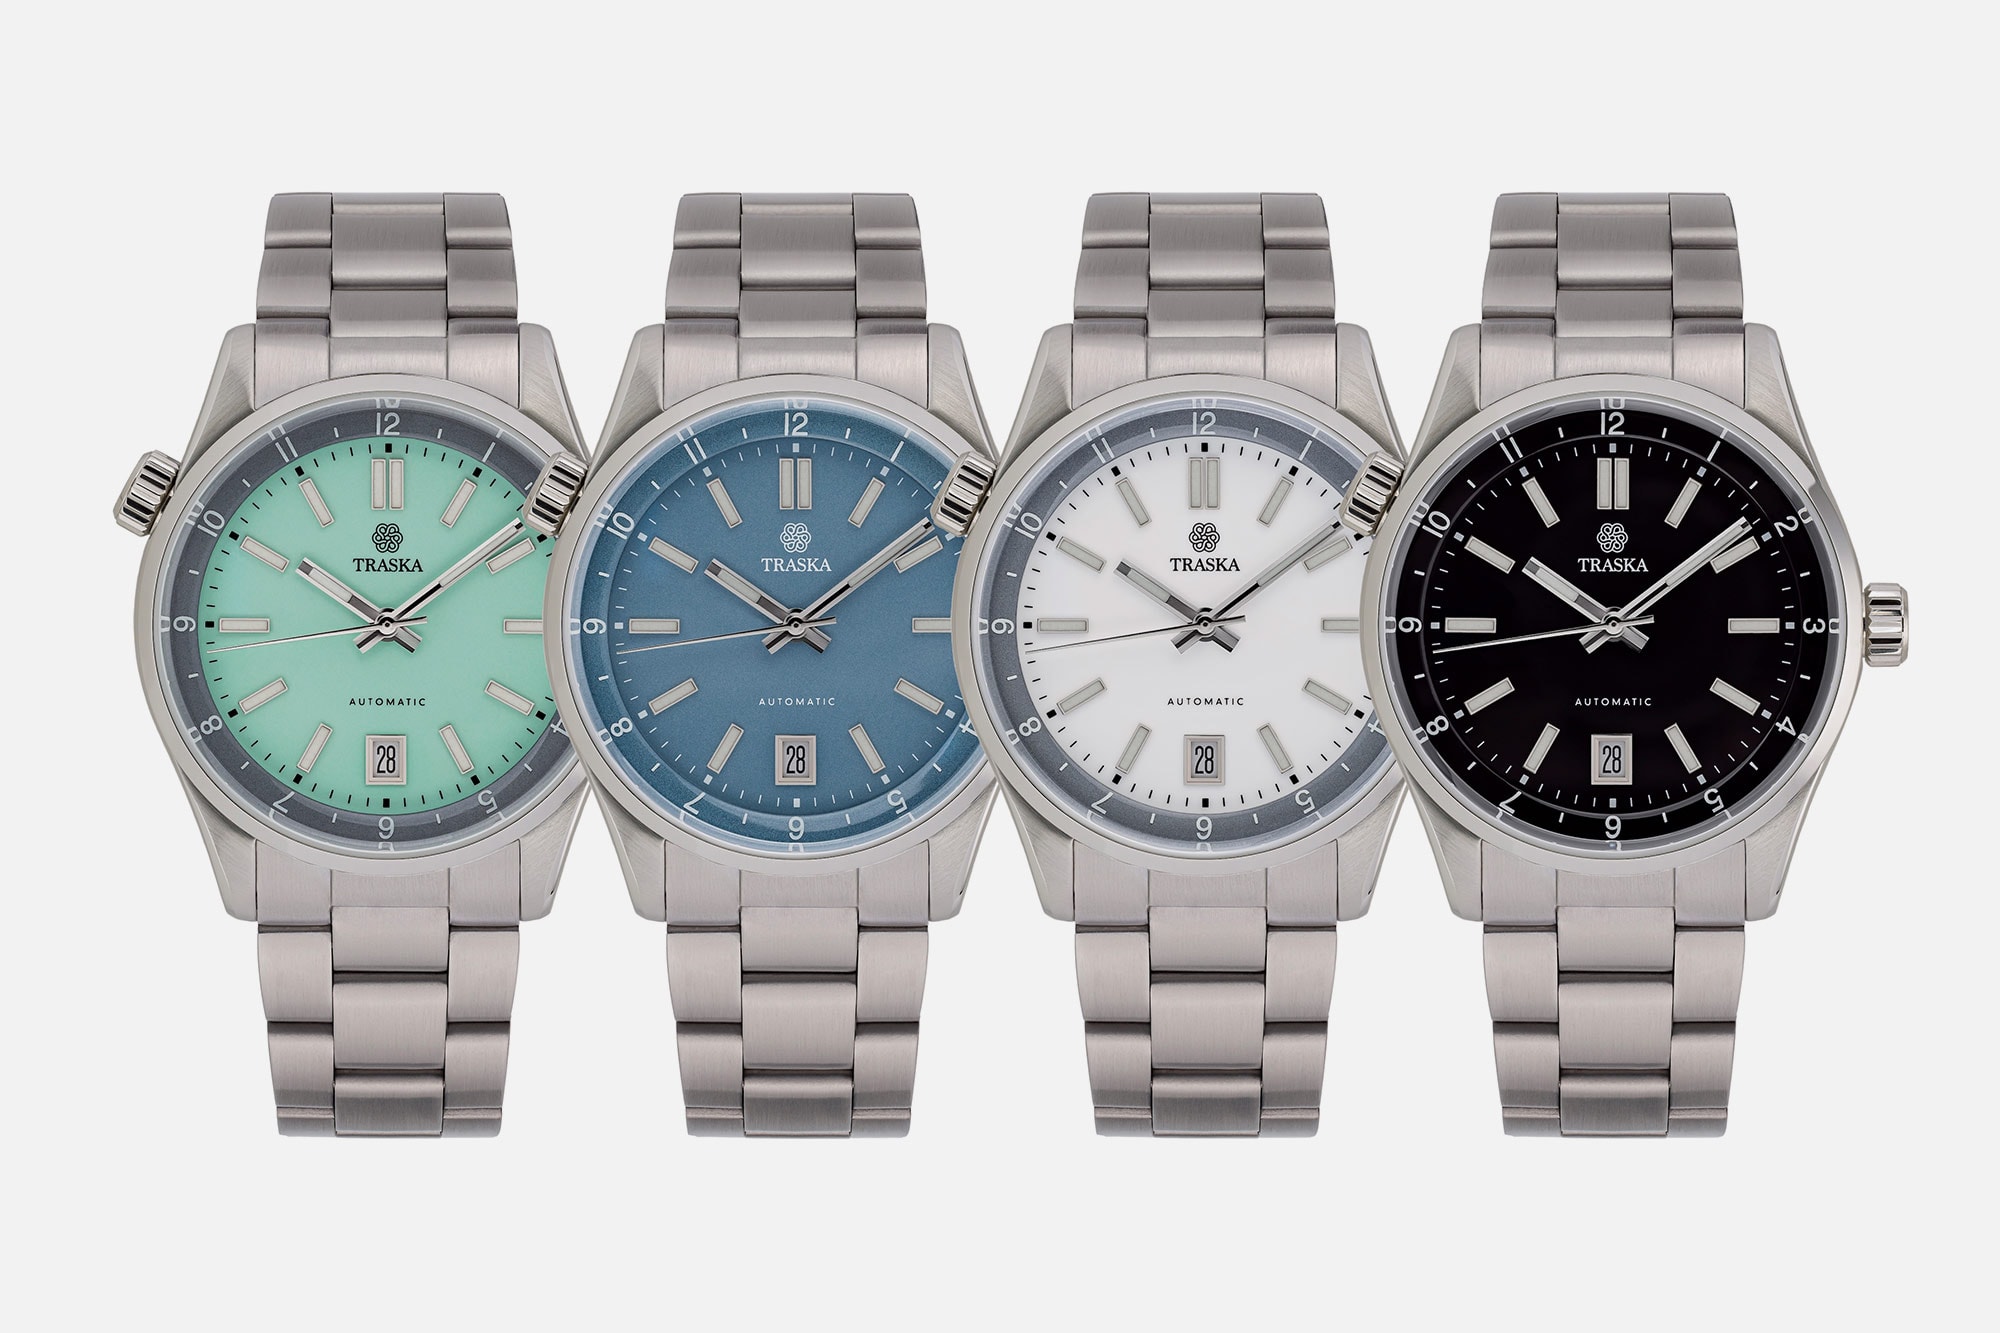 Traska Introduces an Affordable, Vintage Inspired Sports Watch with Lacquered Dials in Four Colors